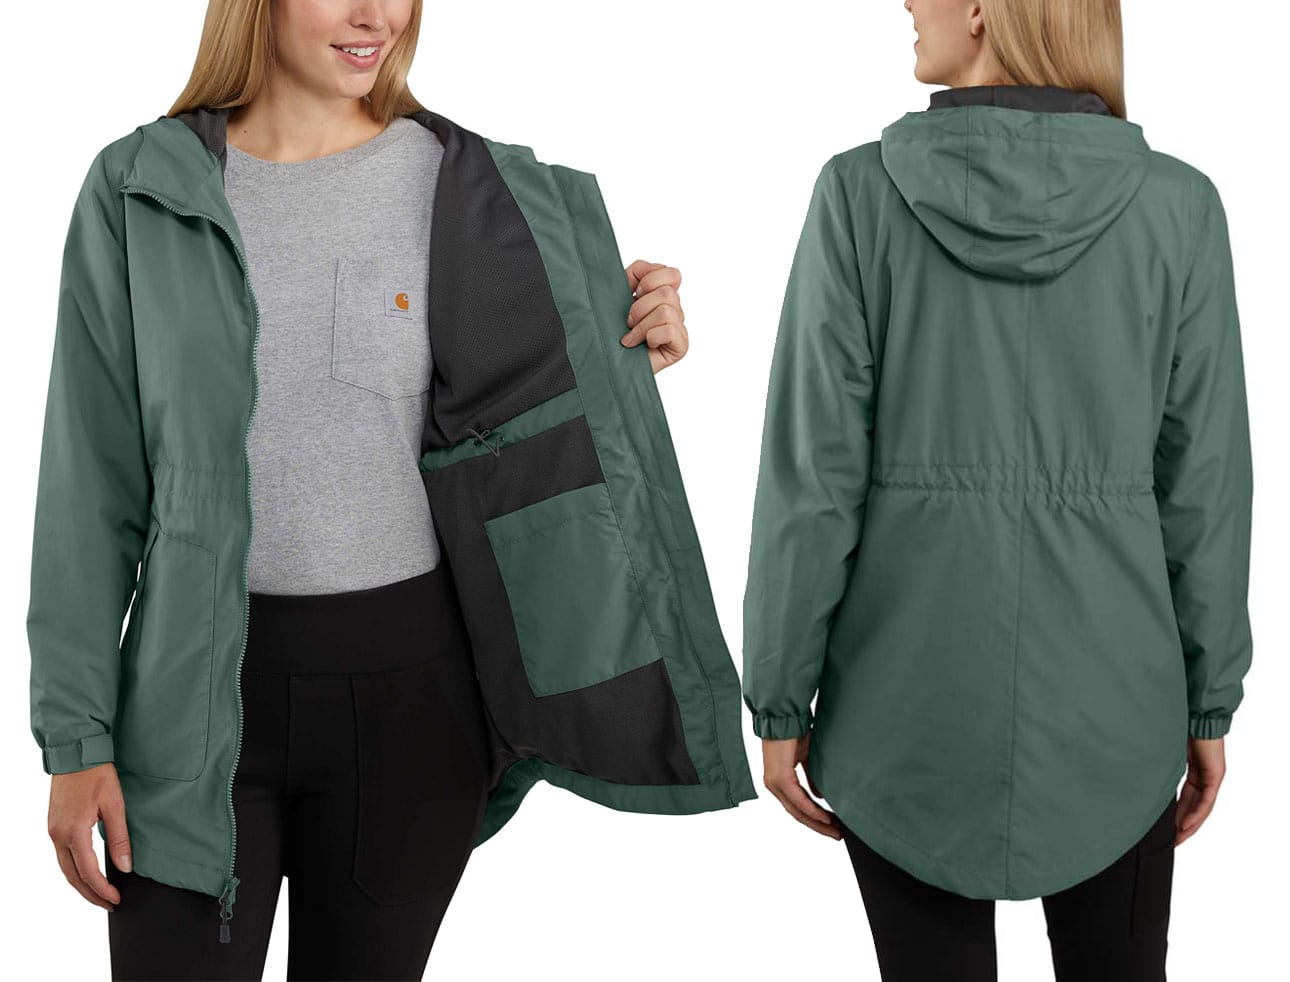 This lightweight rain jacket weighs in at only two ounces and can easily be stashed in your bag